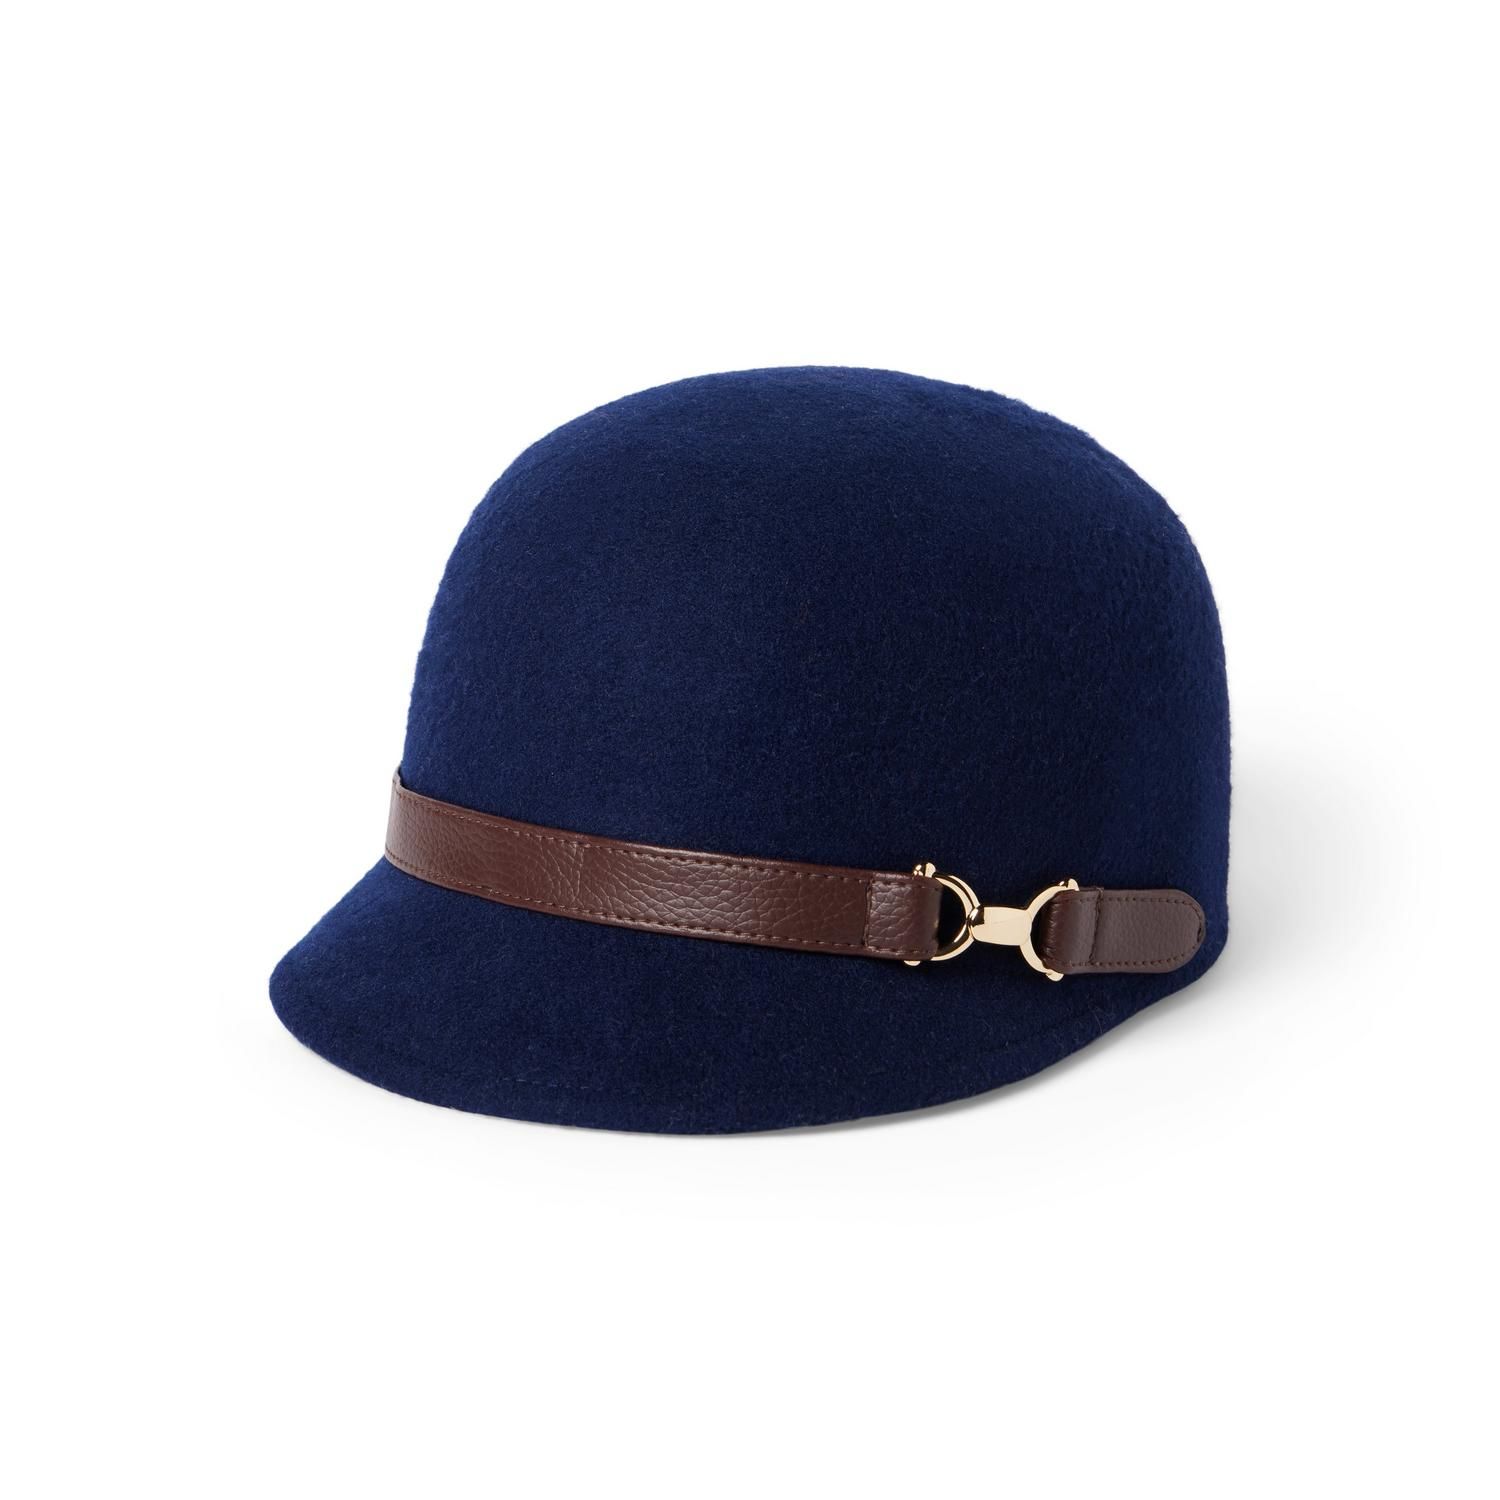 Riding Cap | Janie and Jack